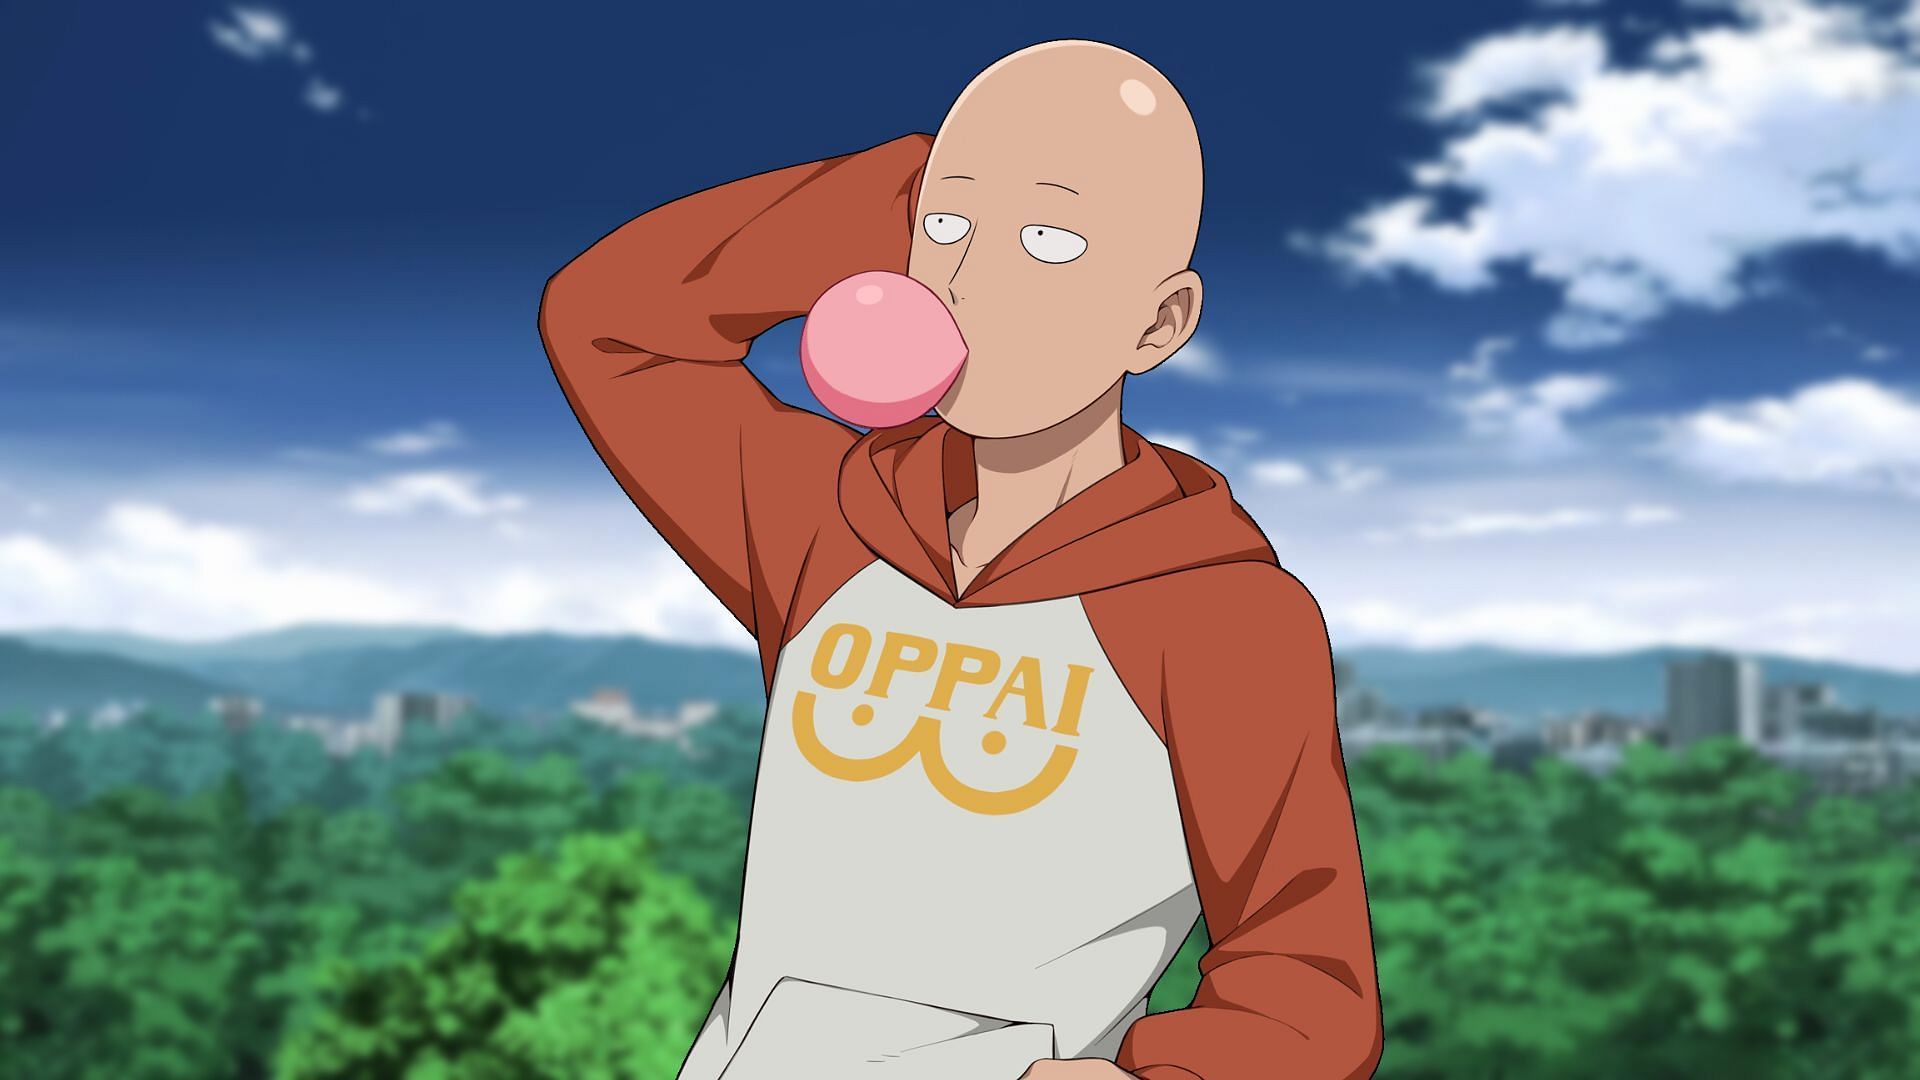 One Punch Man: Why Saitama wearing an 'Oppai' hoodie offends